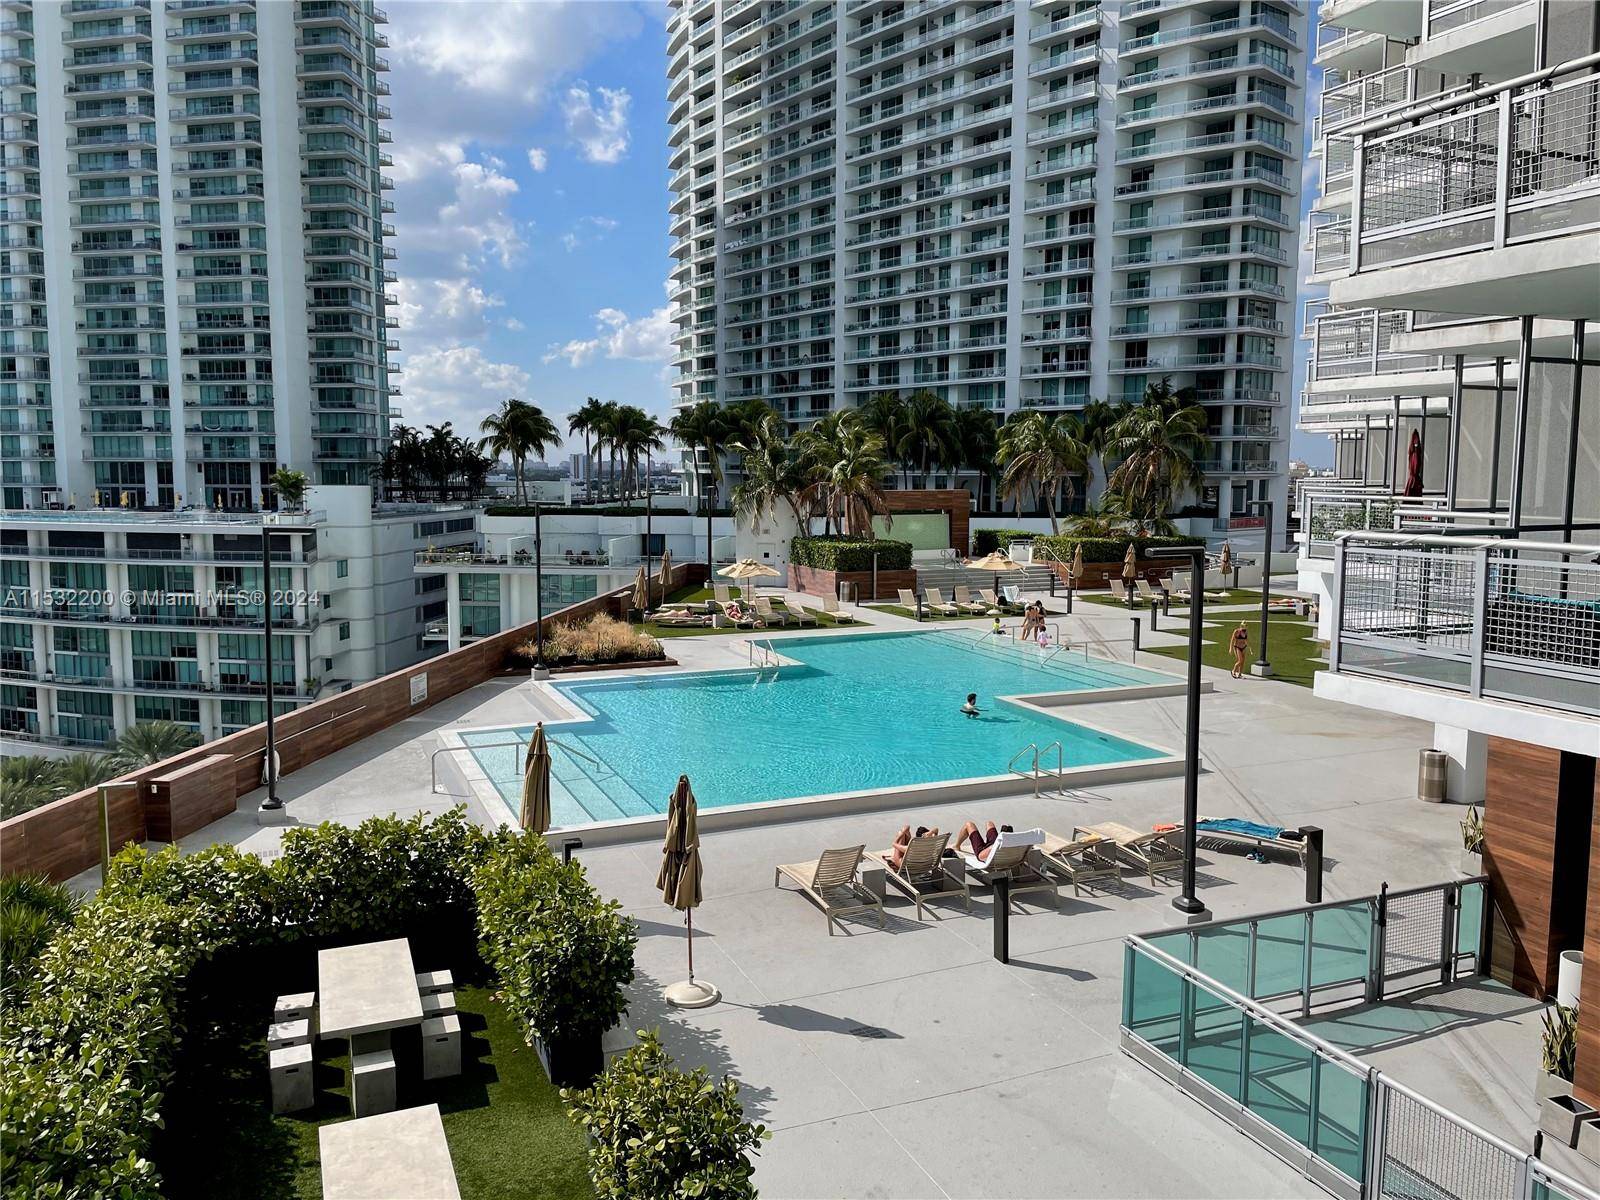 Experience urban living at its finest at Wind with breathtaking river, city, and pool views from every room.